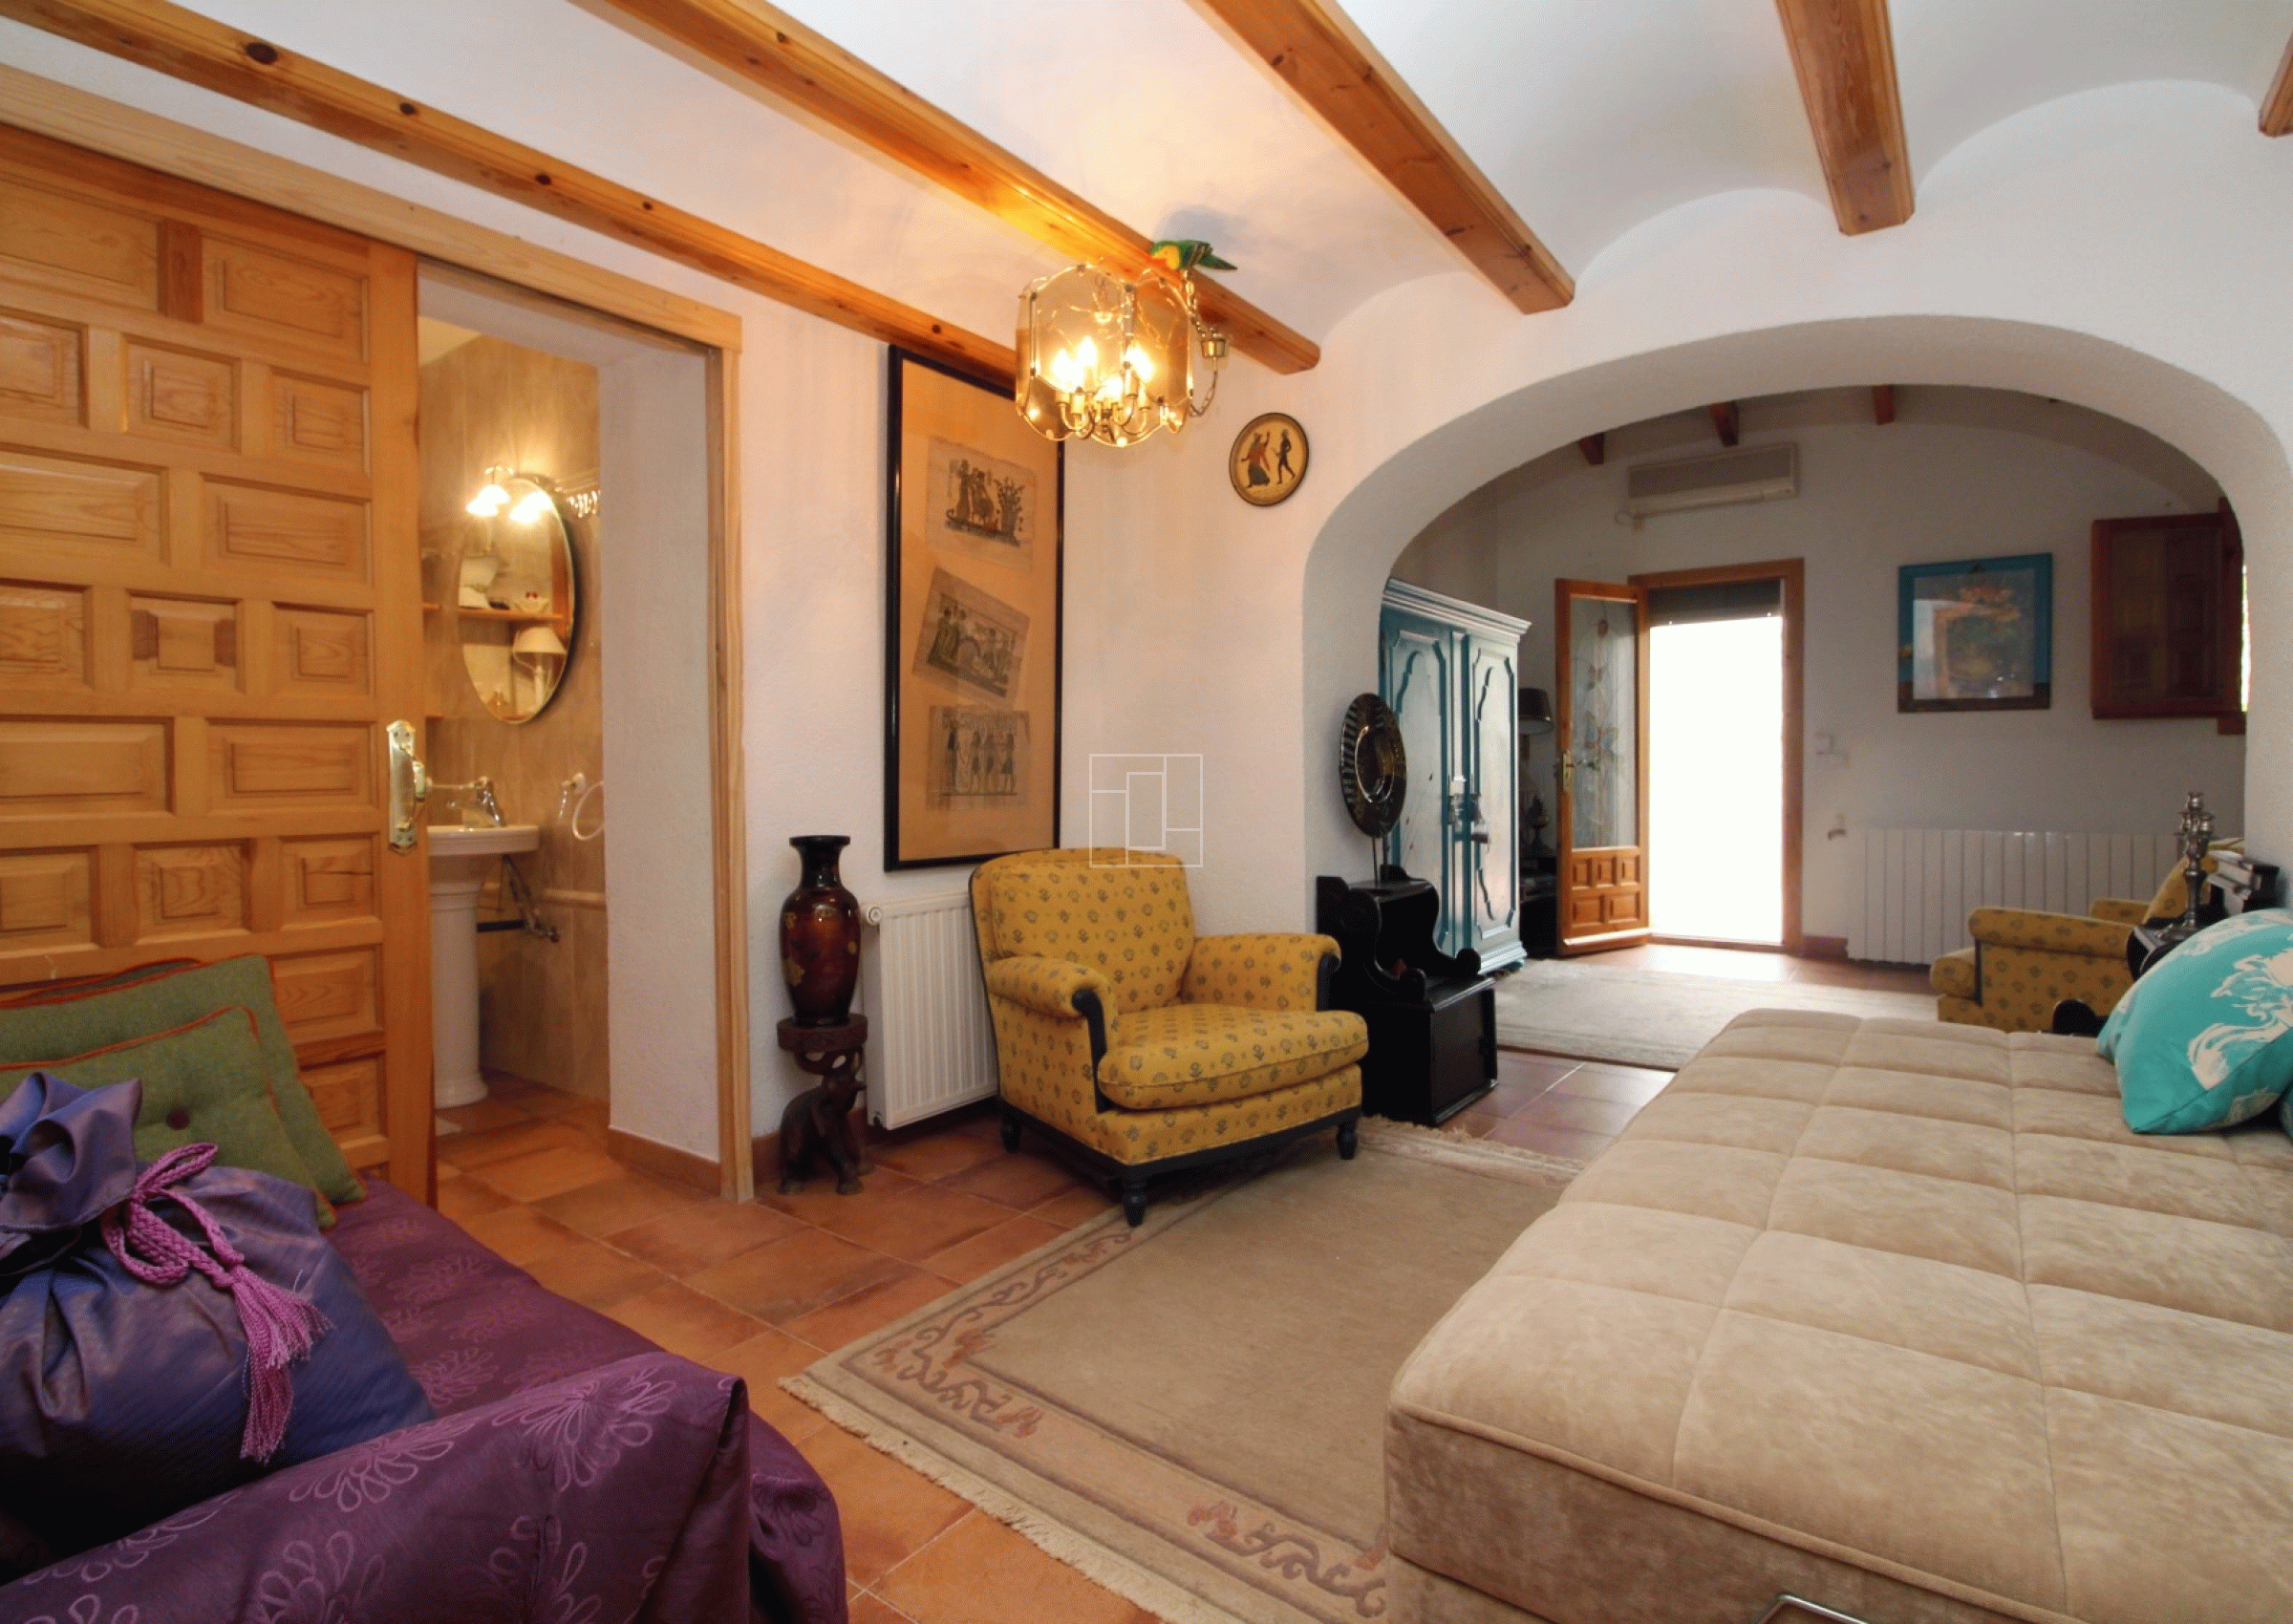 Beautiful country house in a peaceful environment in Benitachell
OV